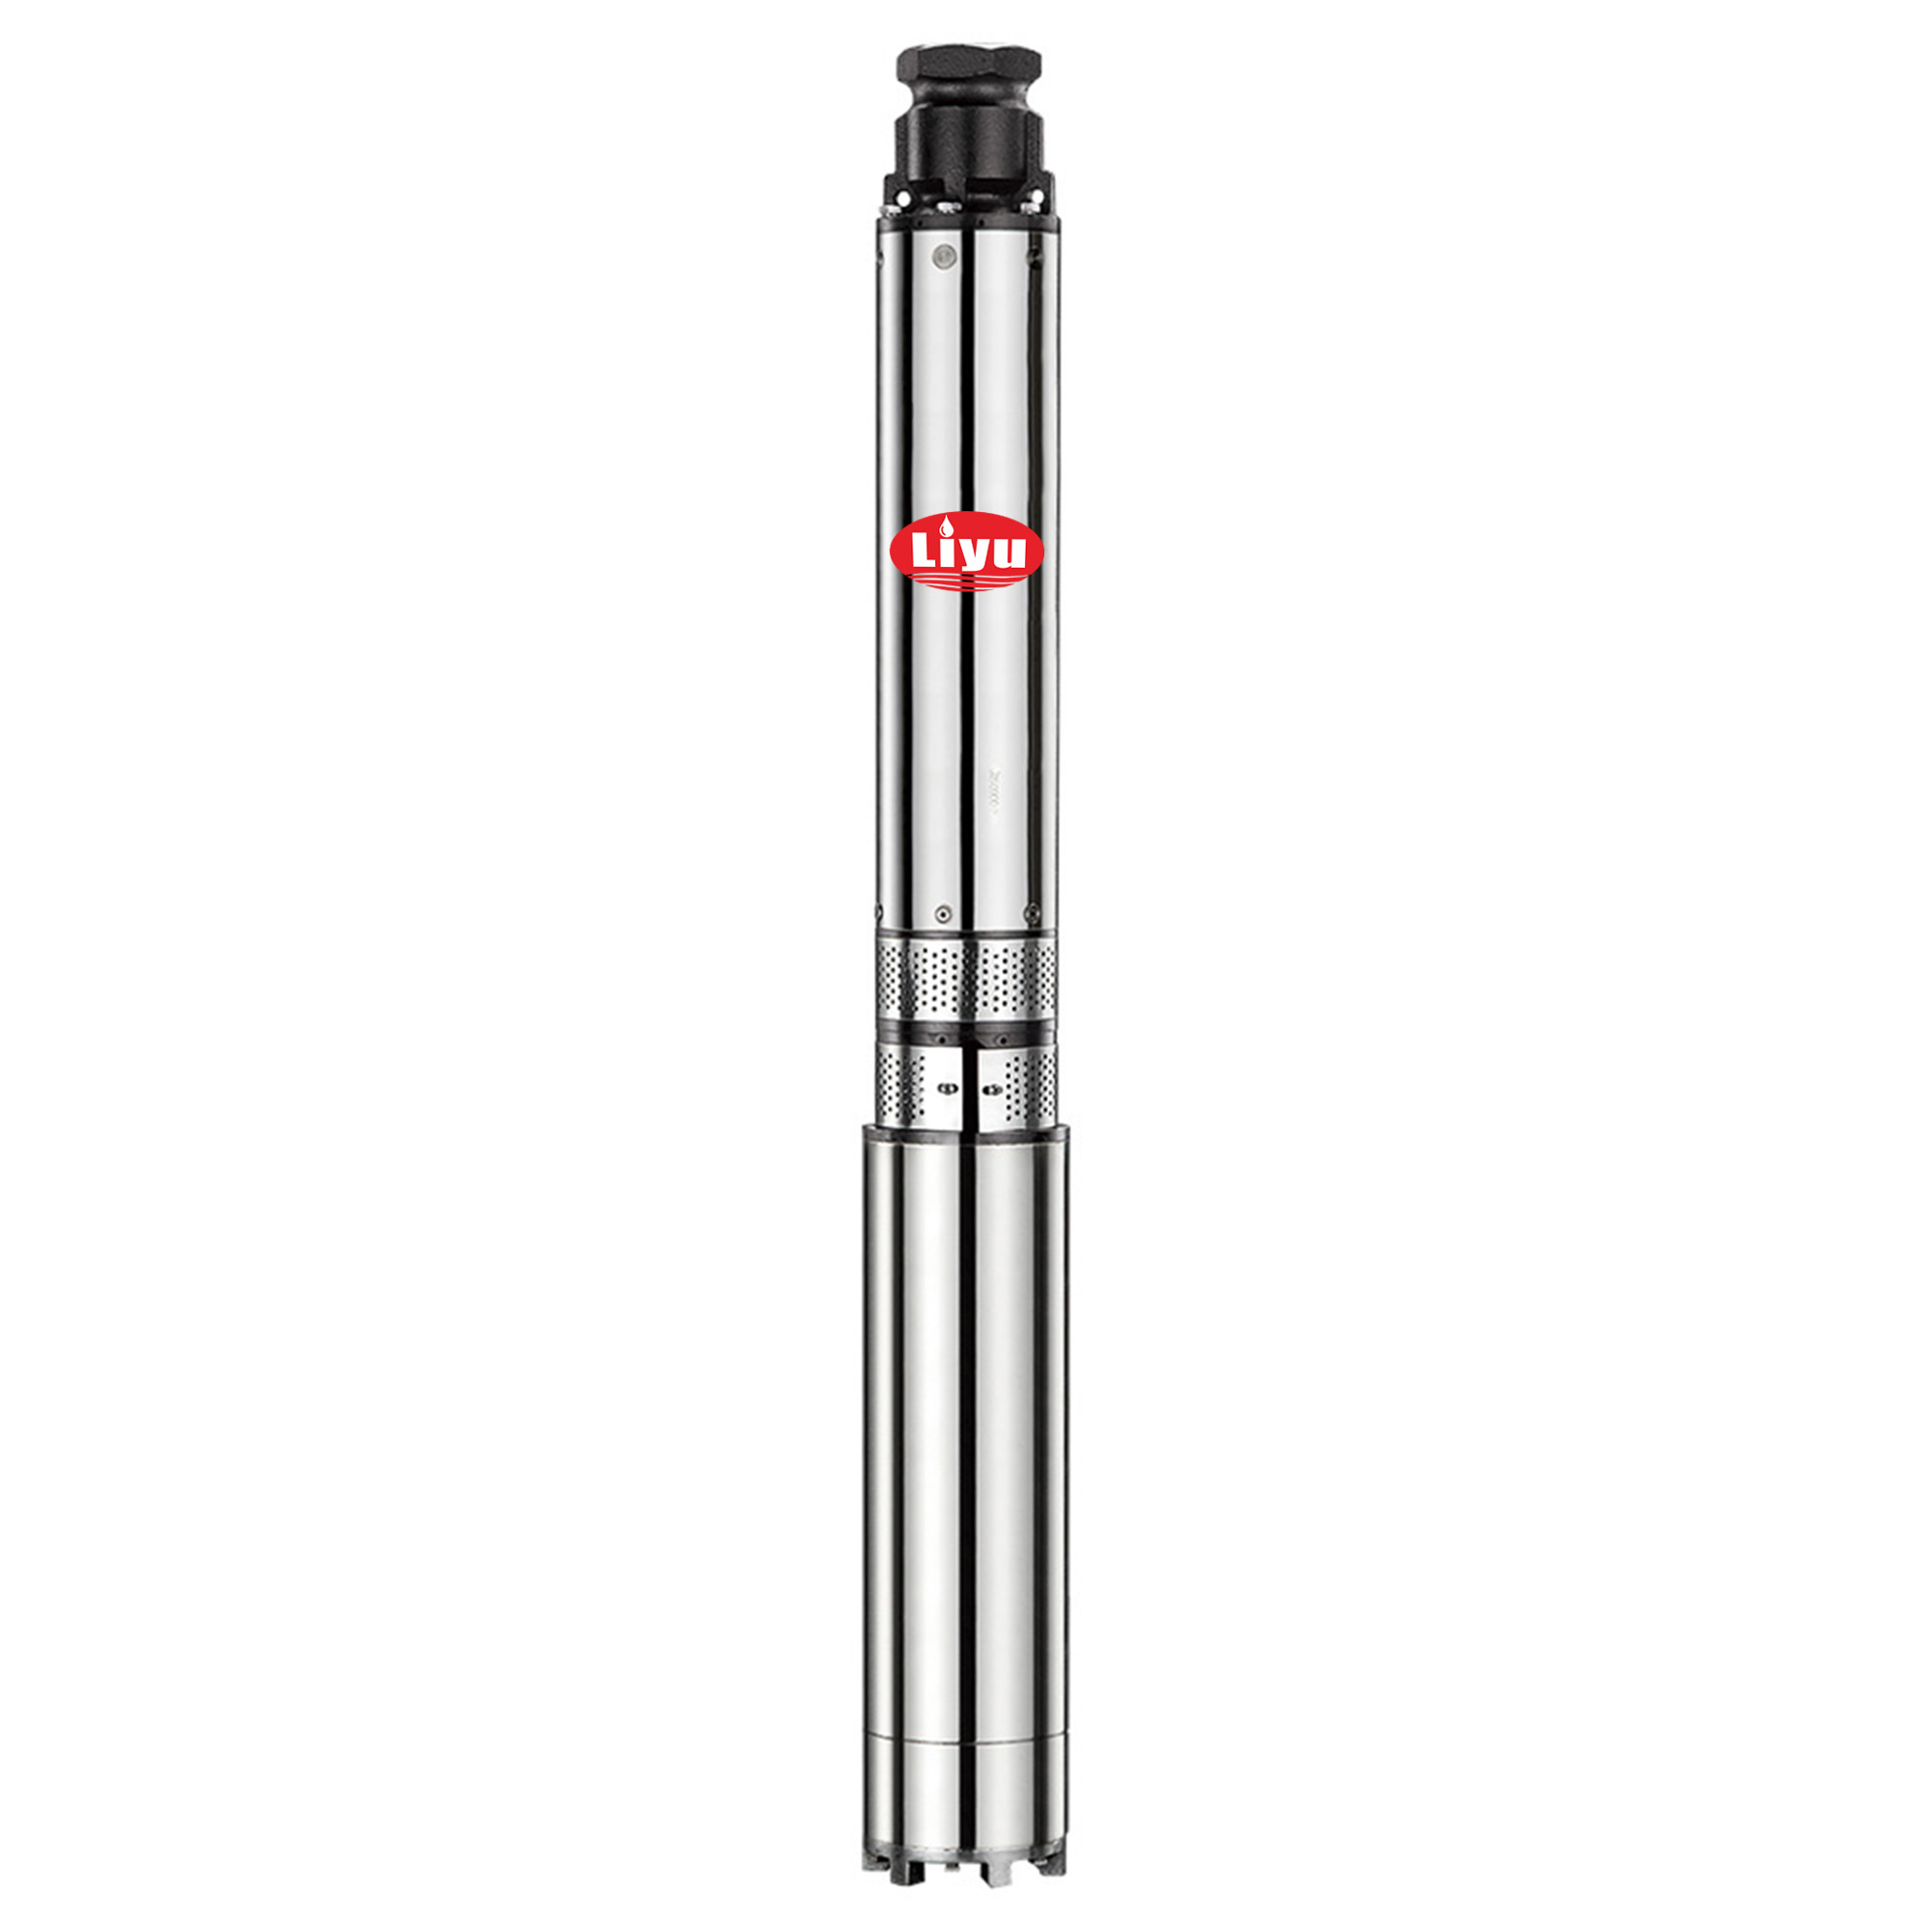 5QJ 12 Stainless Steel Submersible Pump